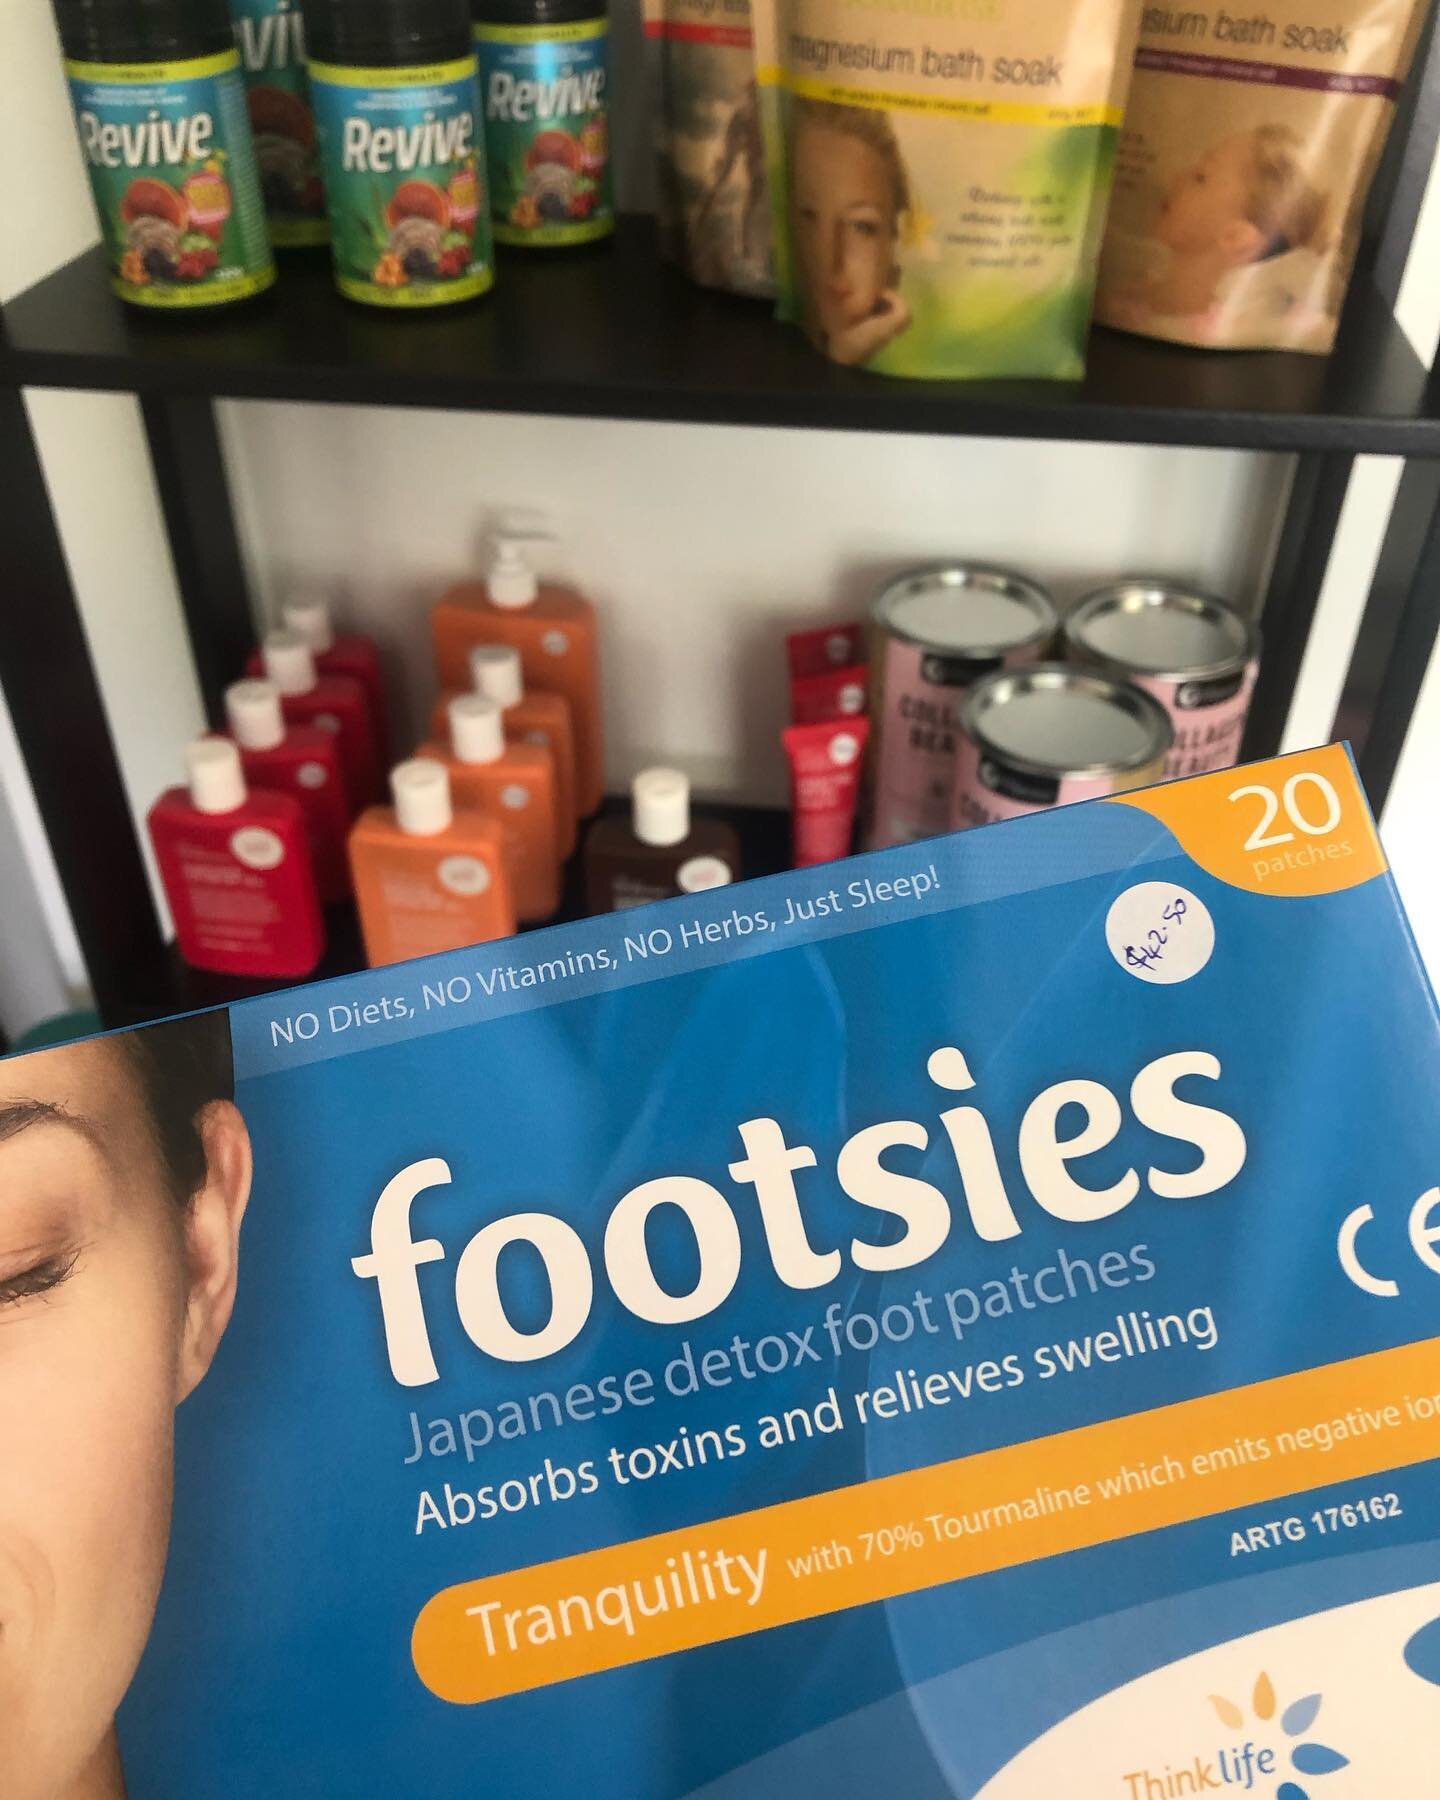 Footsies are Japanese detox foot patches which absorb toxins and relieve swelling. 

Revive is a premium superfood blend with herbs which boosts immunity.

Caro uses Collagen in her coffee - it levels out blood sugar amongst other things.